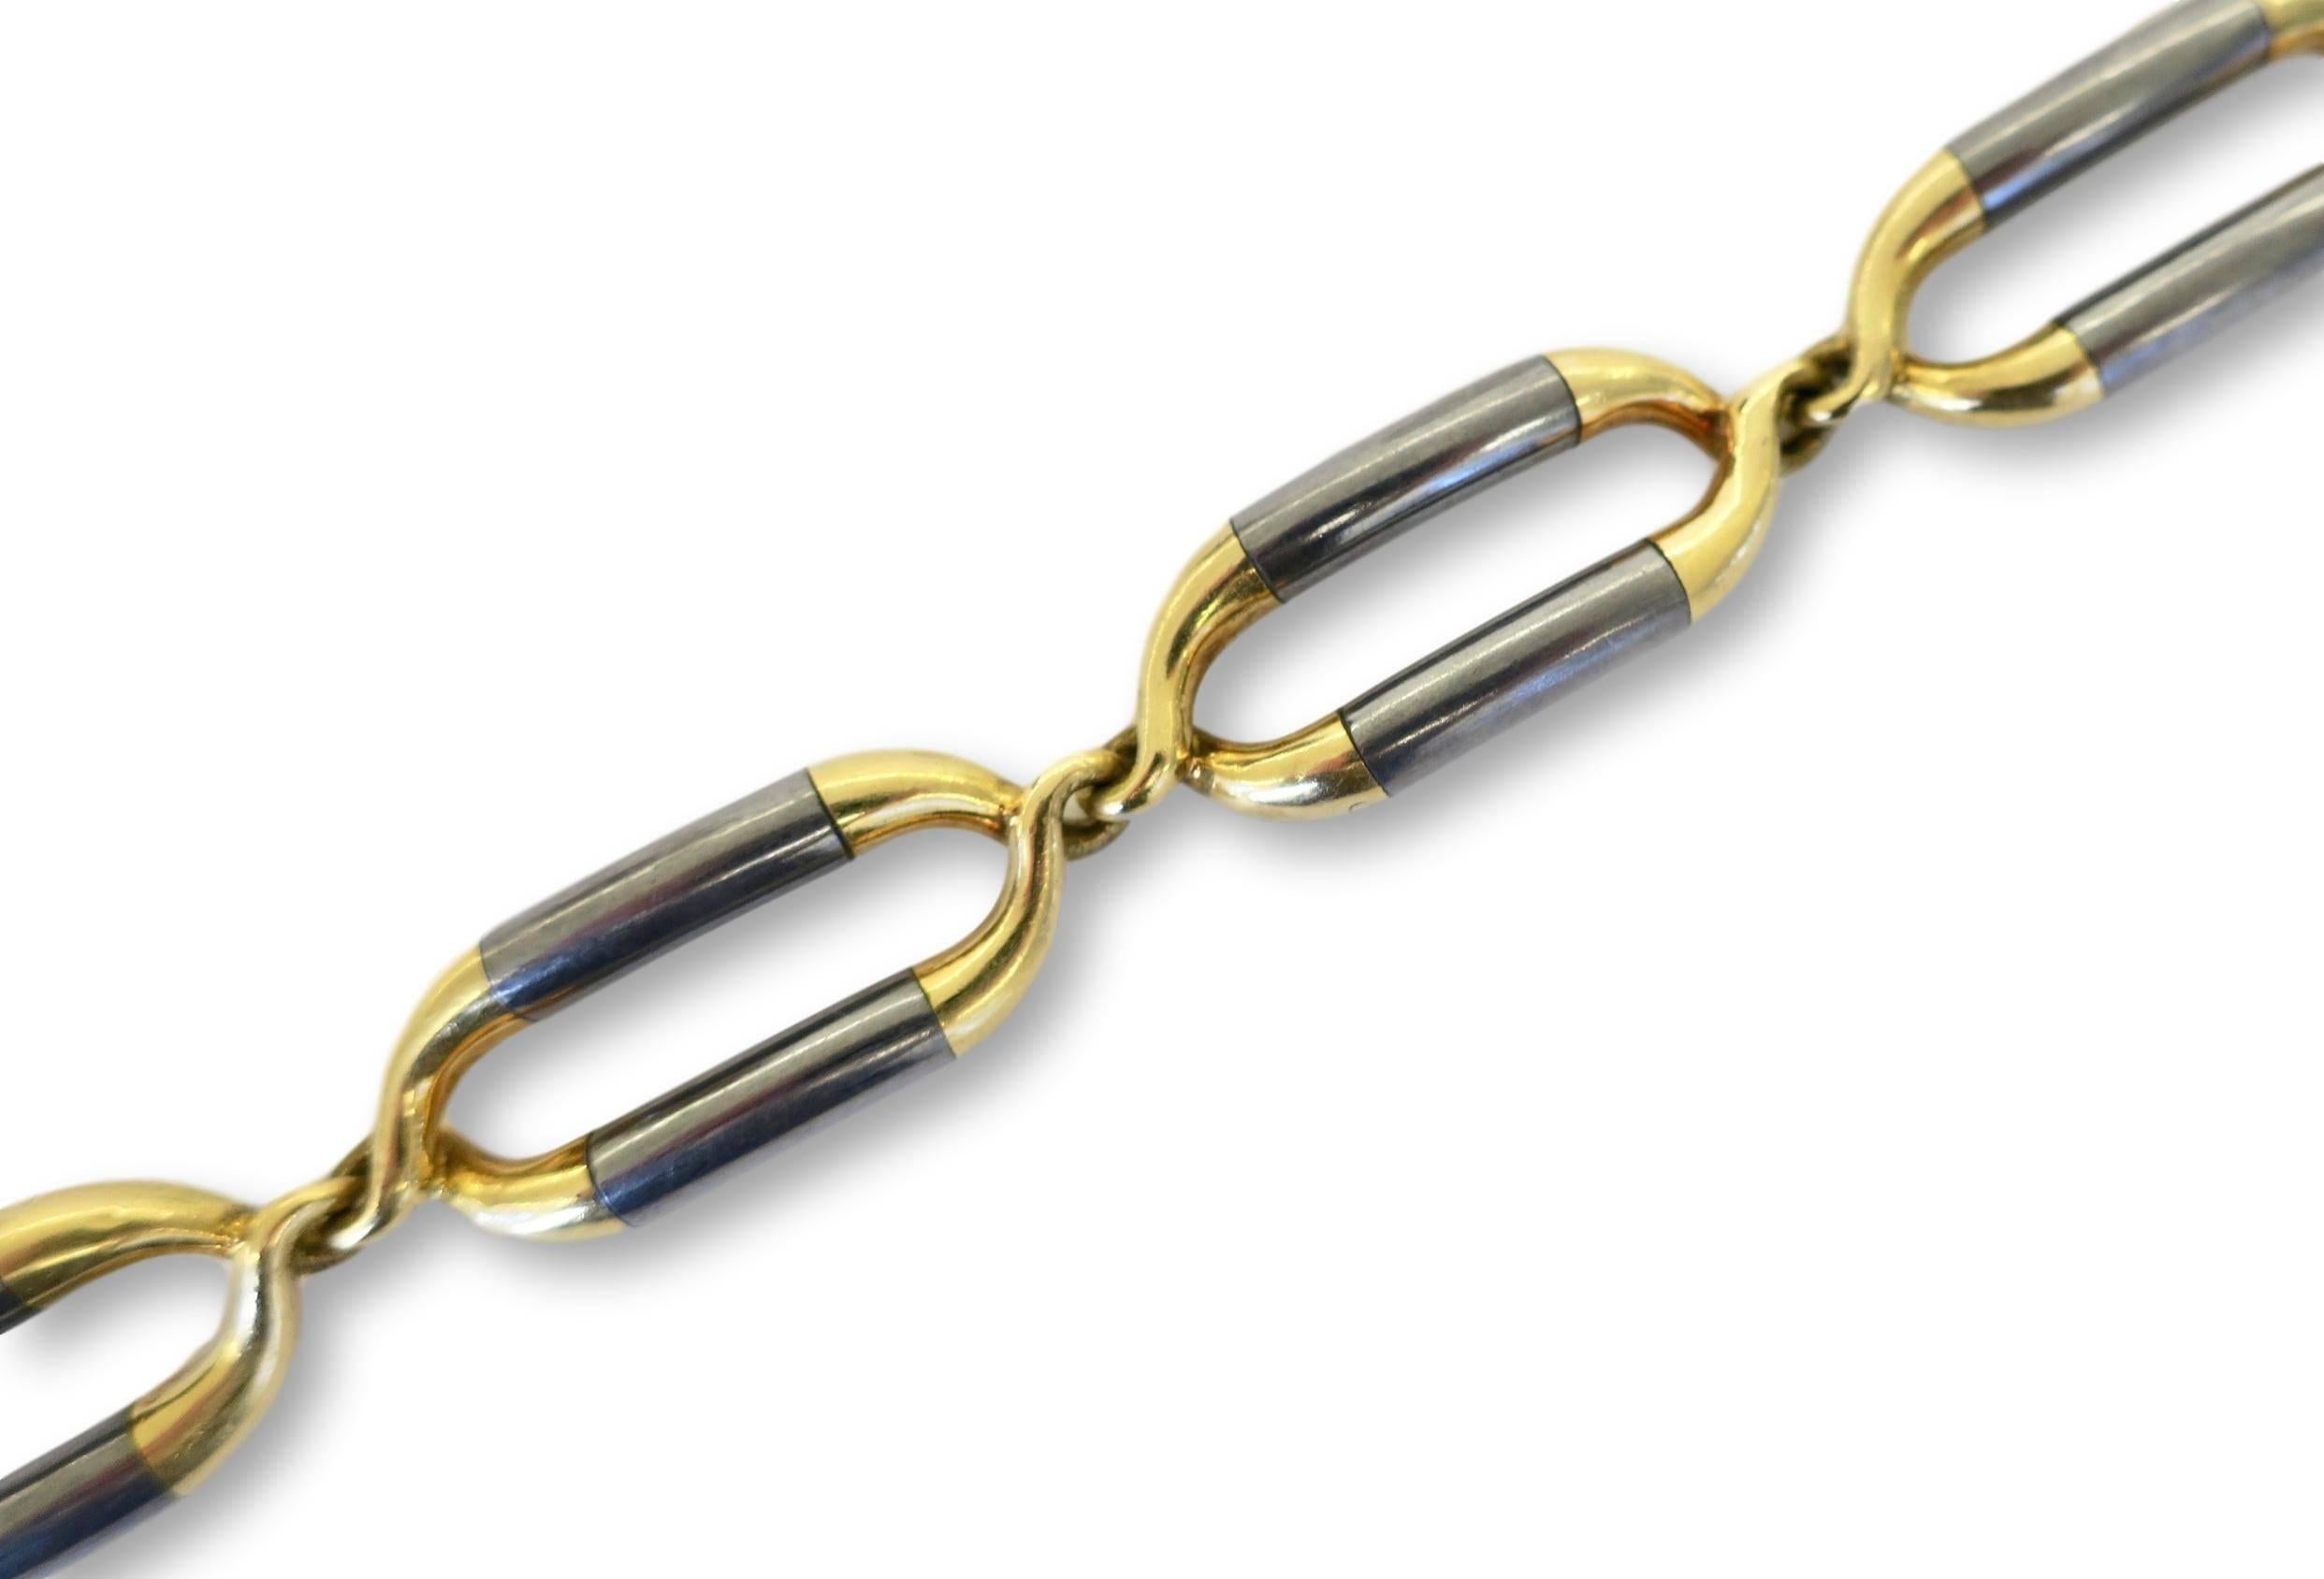 VCA Boutique 1970's chain bracelet . The 7 1/4"  18k and Steel bracelet made up of six oval links. Designed by Gay Freres for Van Cleef and Arpels in the 70's , this hefty unisex bracelet is easy to wear and a nice departure from a more